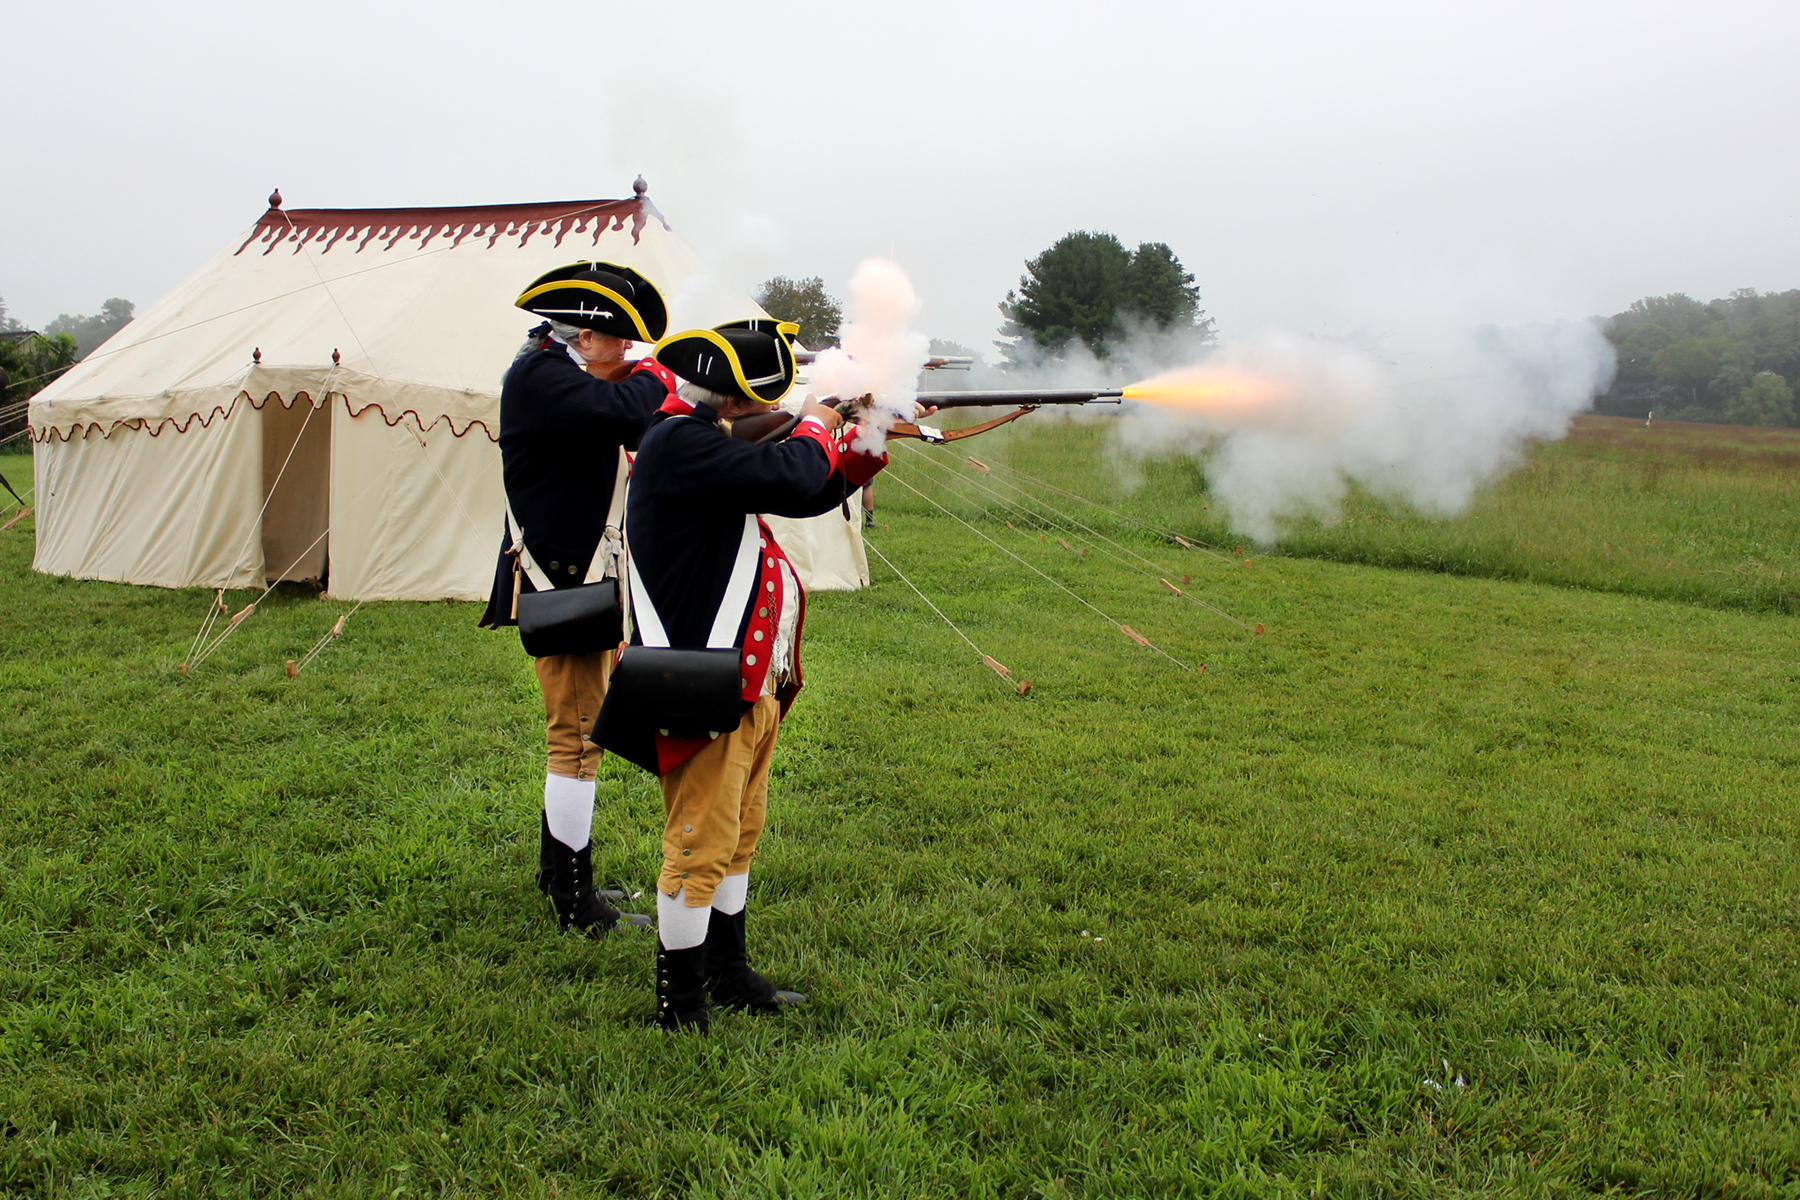 Reenactors from the 1st Delaware Regiment firing off a few rounds from their muskets, with a replica of George Washington’s tent in the background, courtesy of the Museum of the American Revolution.